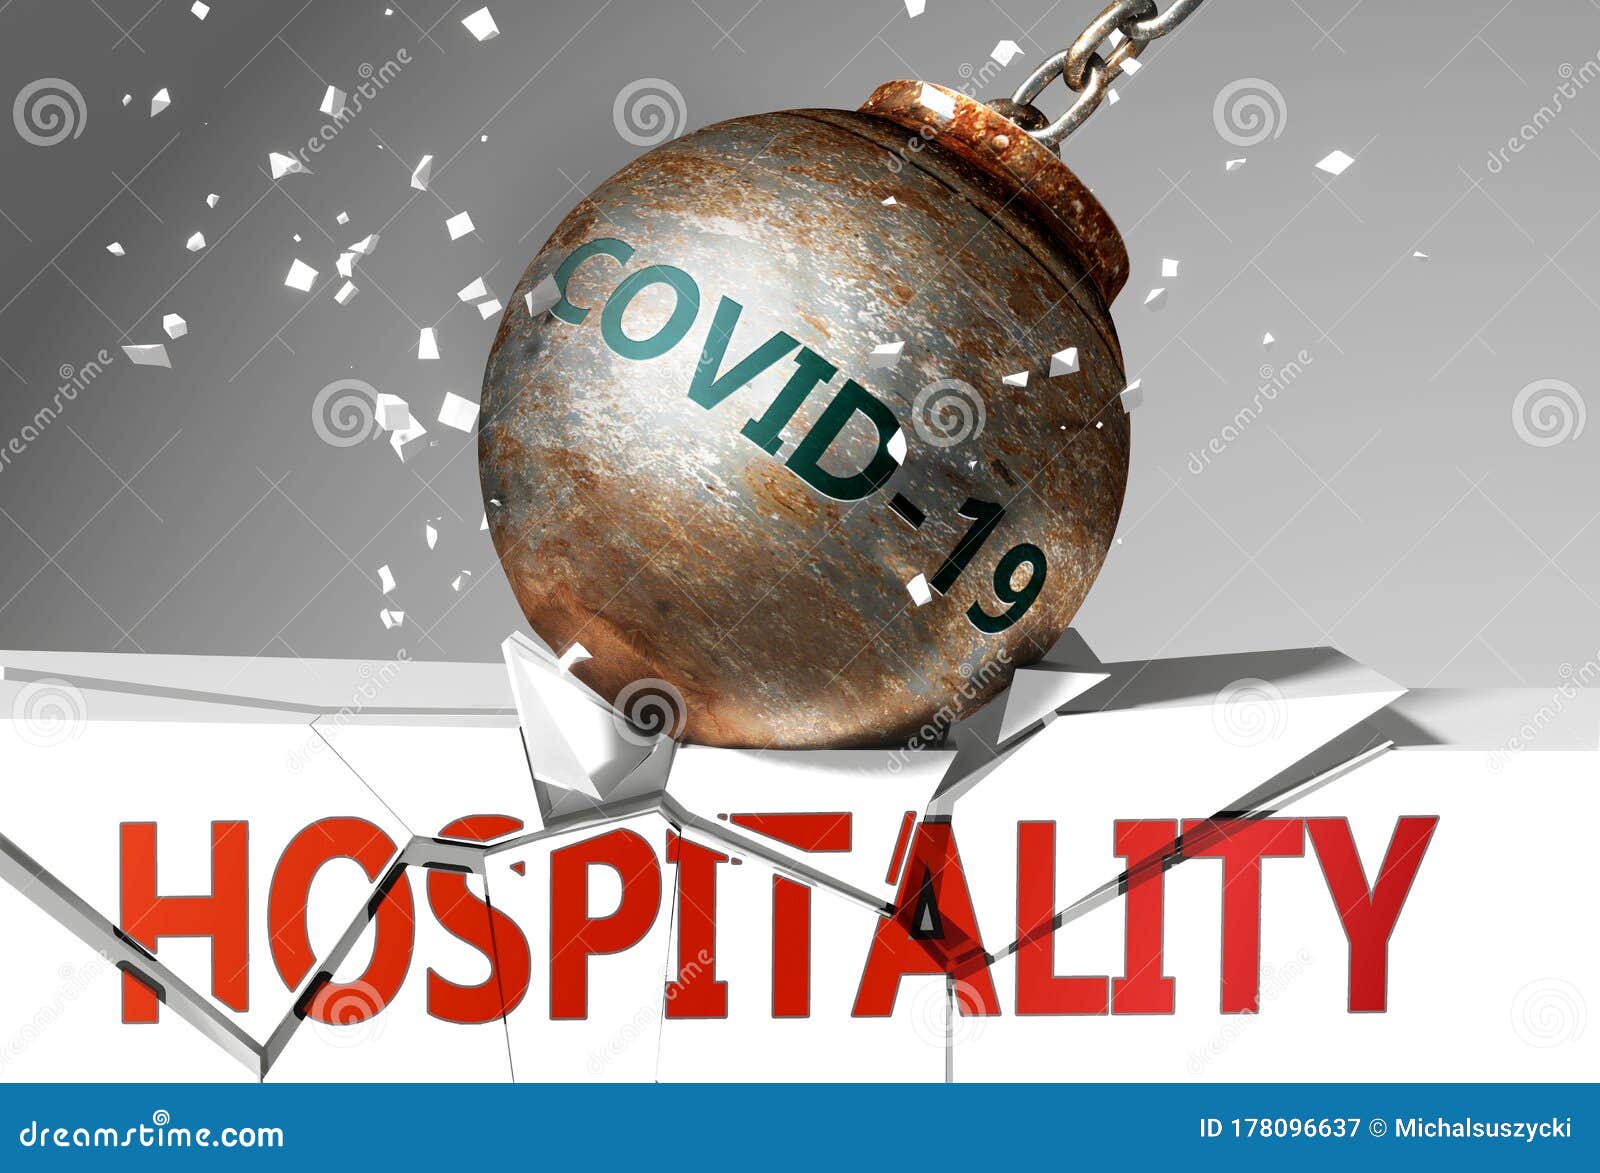 hospitality and coronavirus, ized by the virus destroying word hospitality to picture that covid-19  affects hospitality and